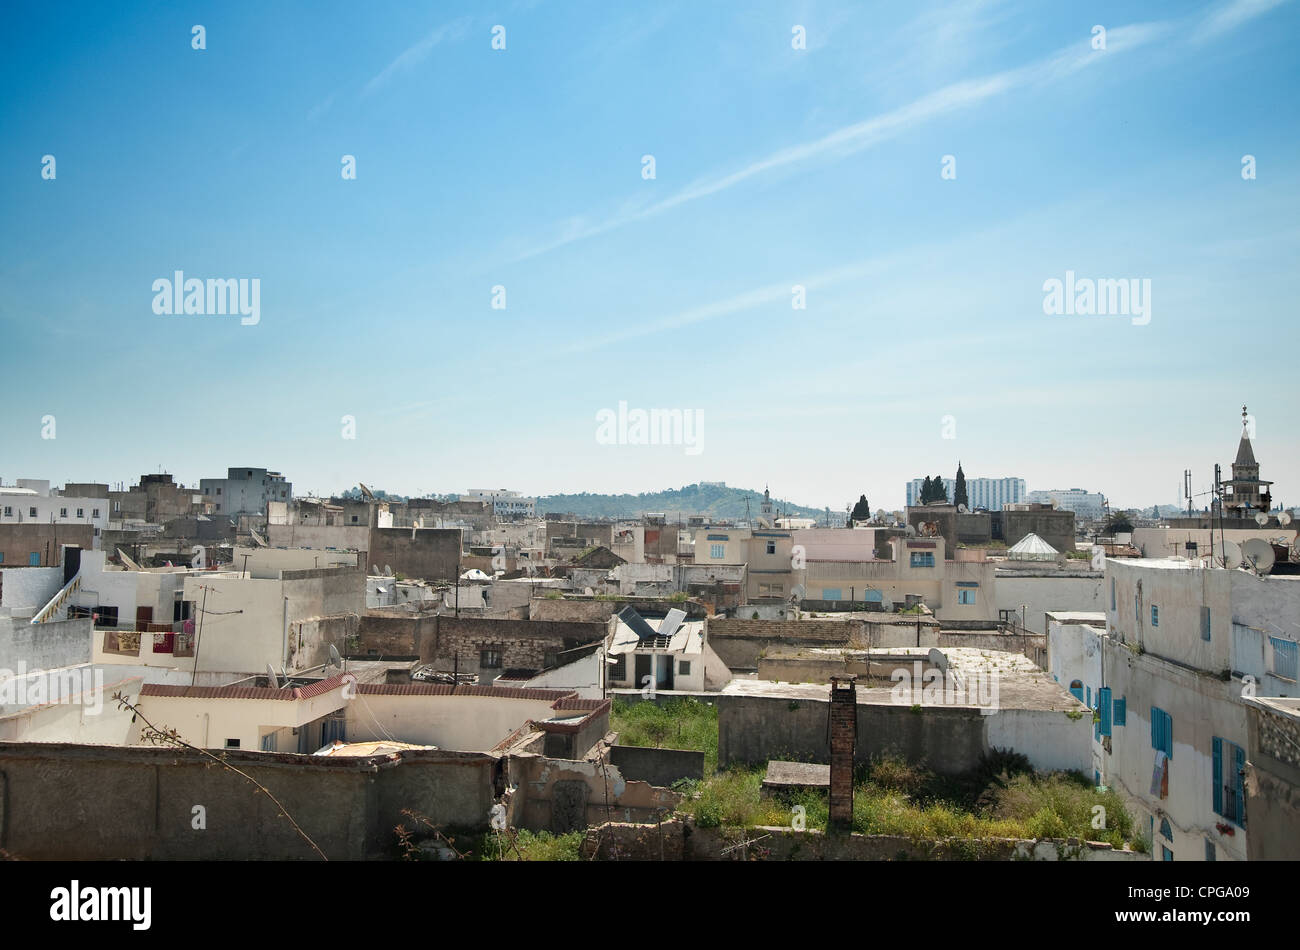 Tunis, Tunisa - Cityscape with rooftops Stock Photo